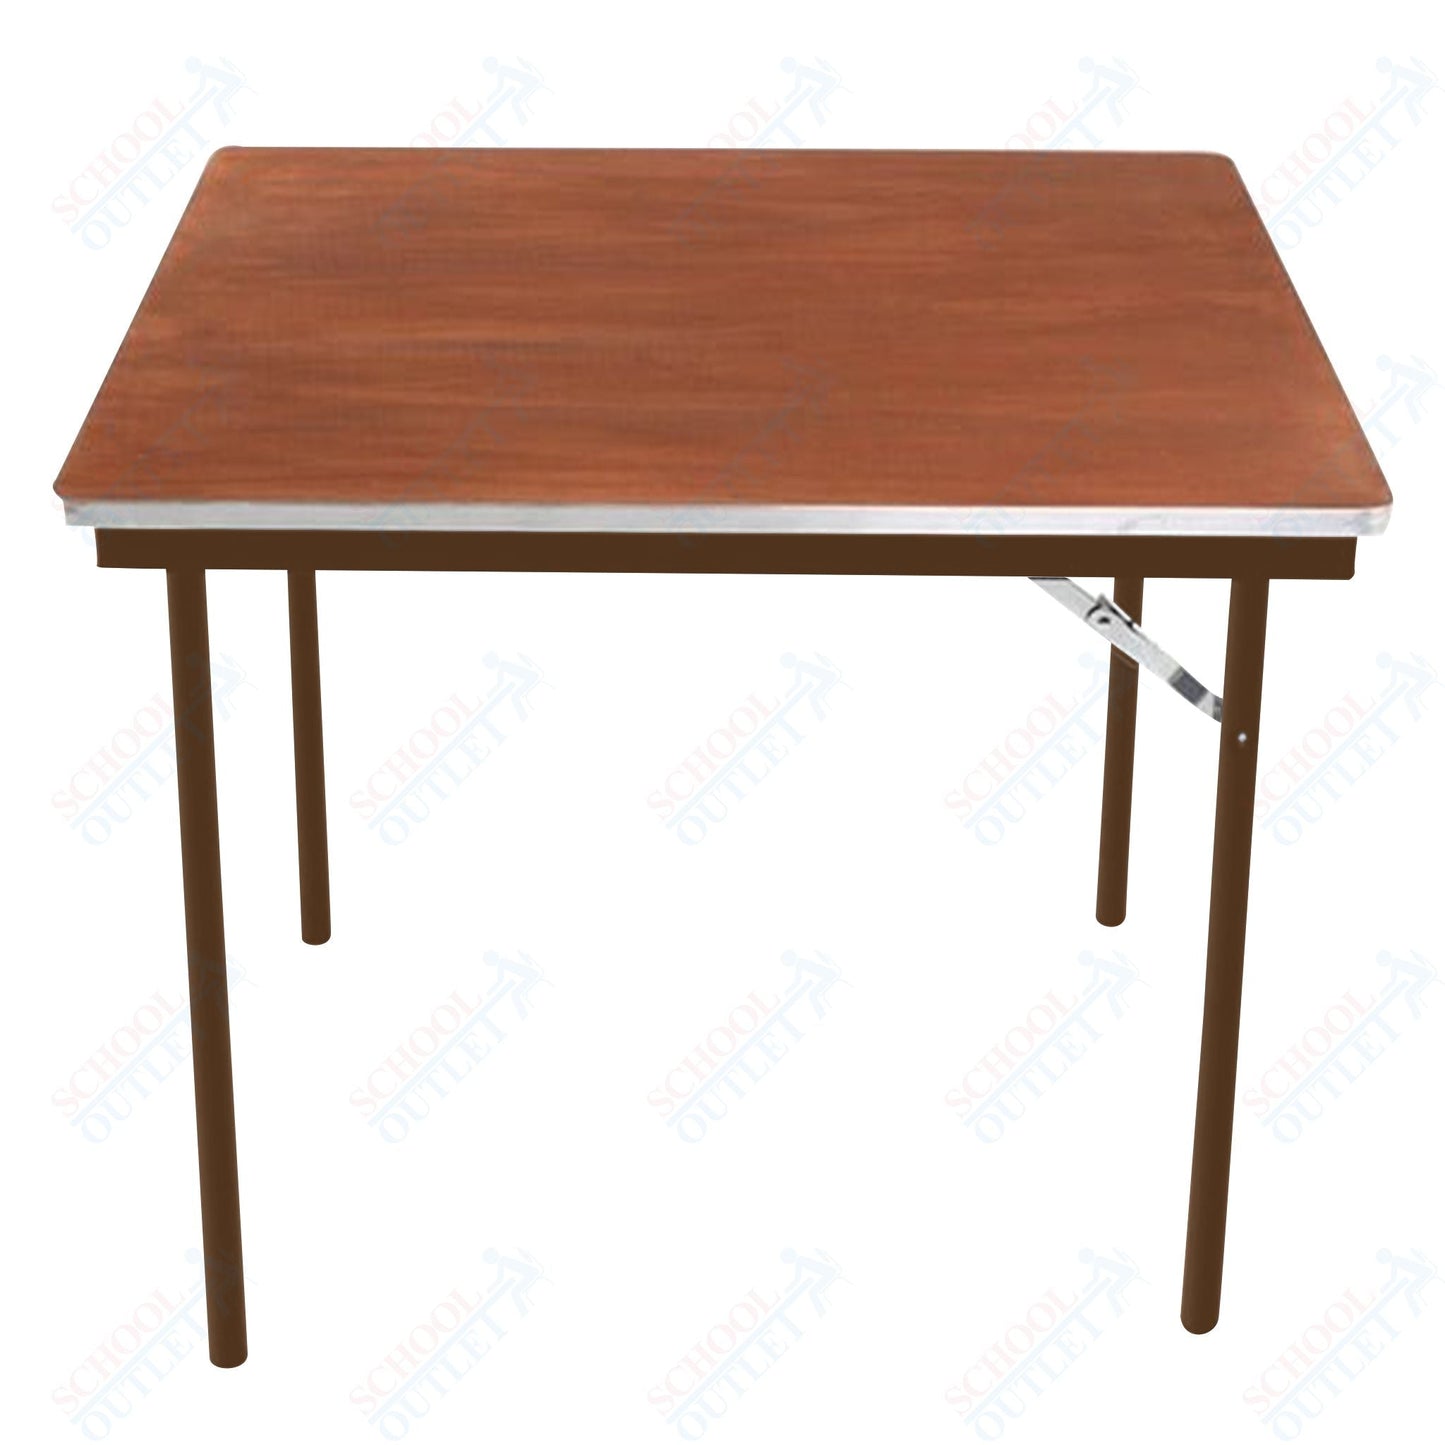 AmTab Folding Table - Plywood Stained and Sealed - Aluminum Edge - Square - 30"W x 30"L x 29"H (AmTab AMT - SQ30PA) - SchoolOutlet